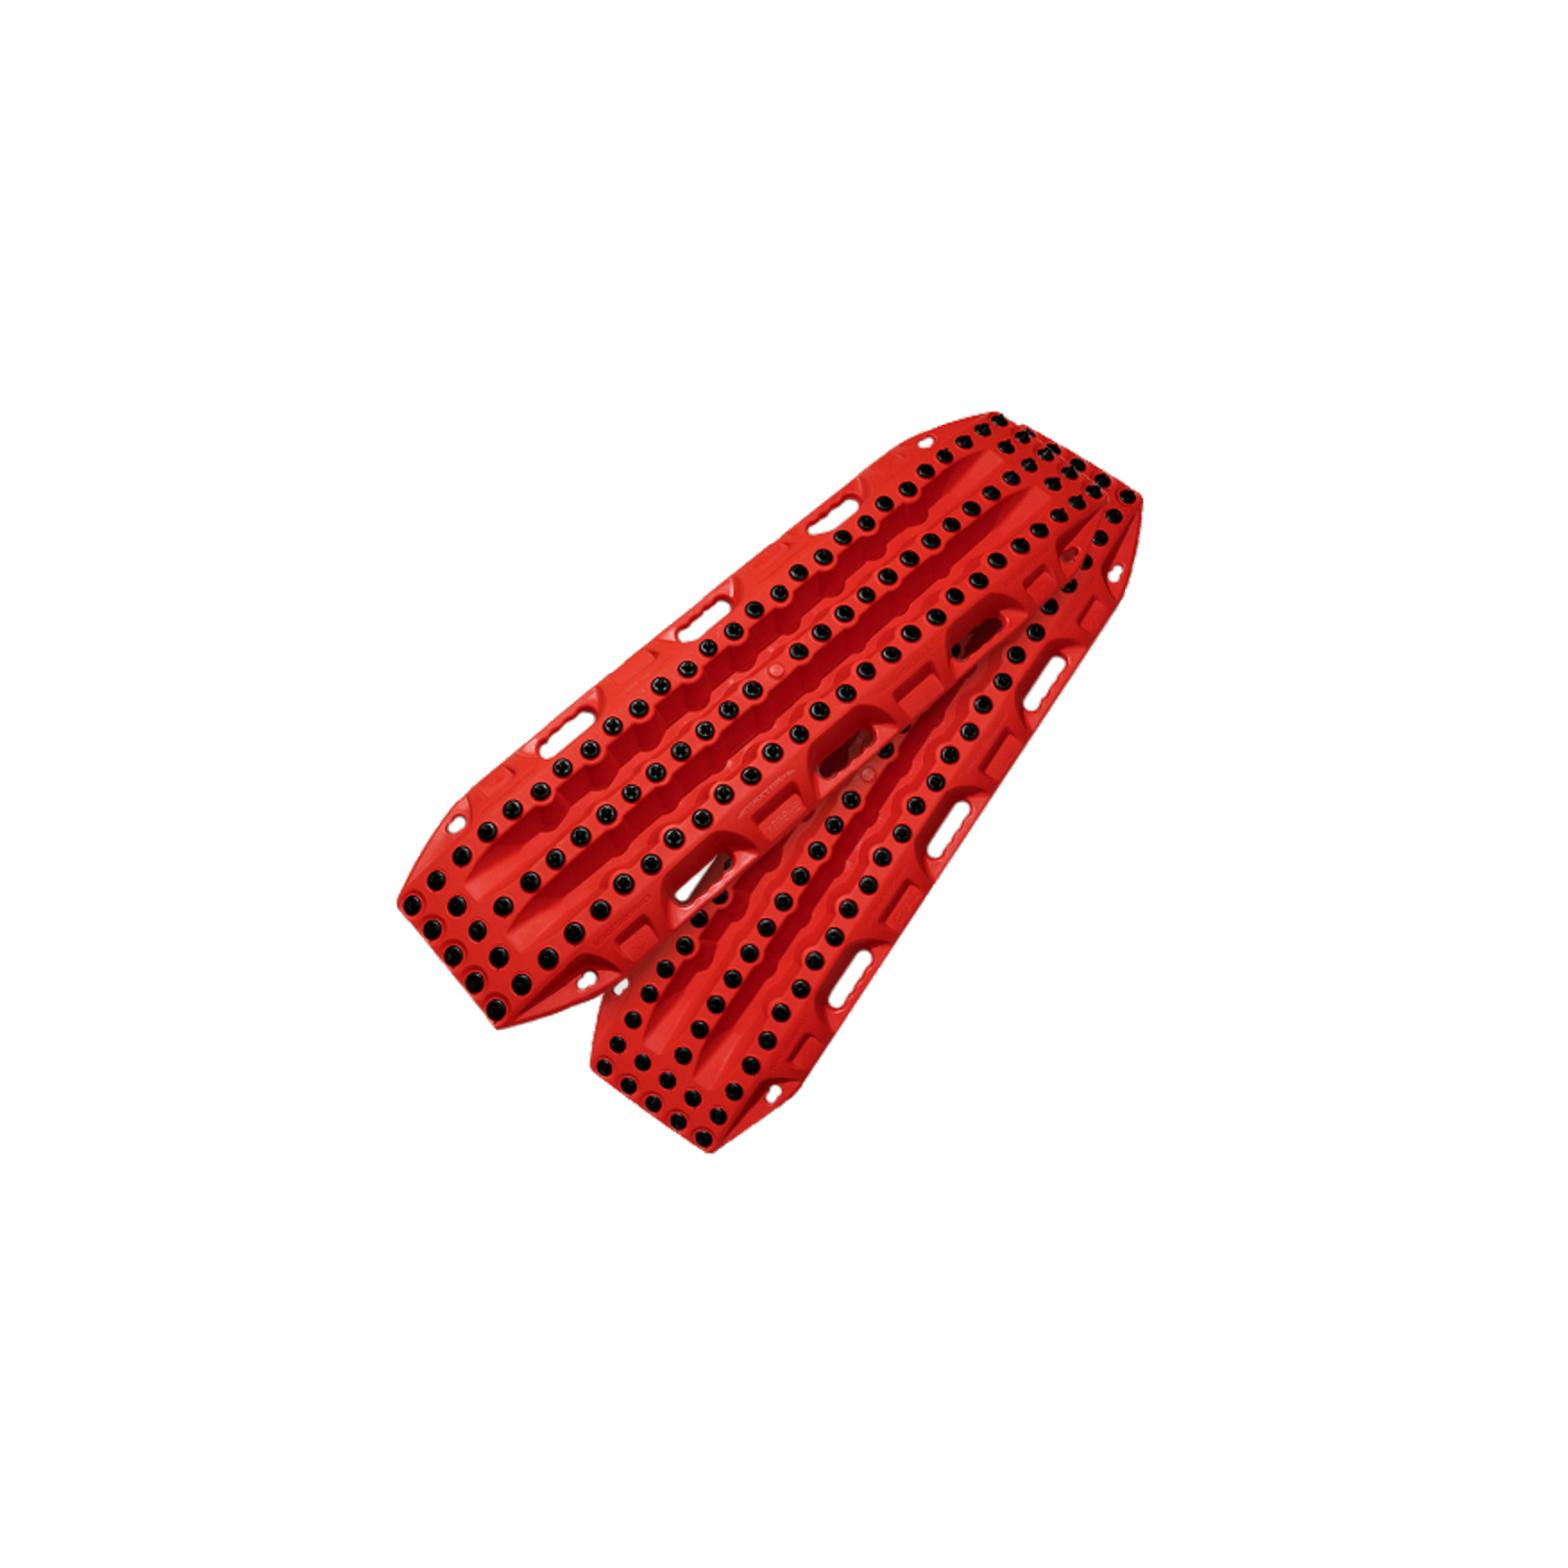 Maxtrax XTREME recovery board in red on white background